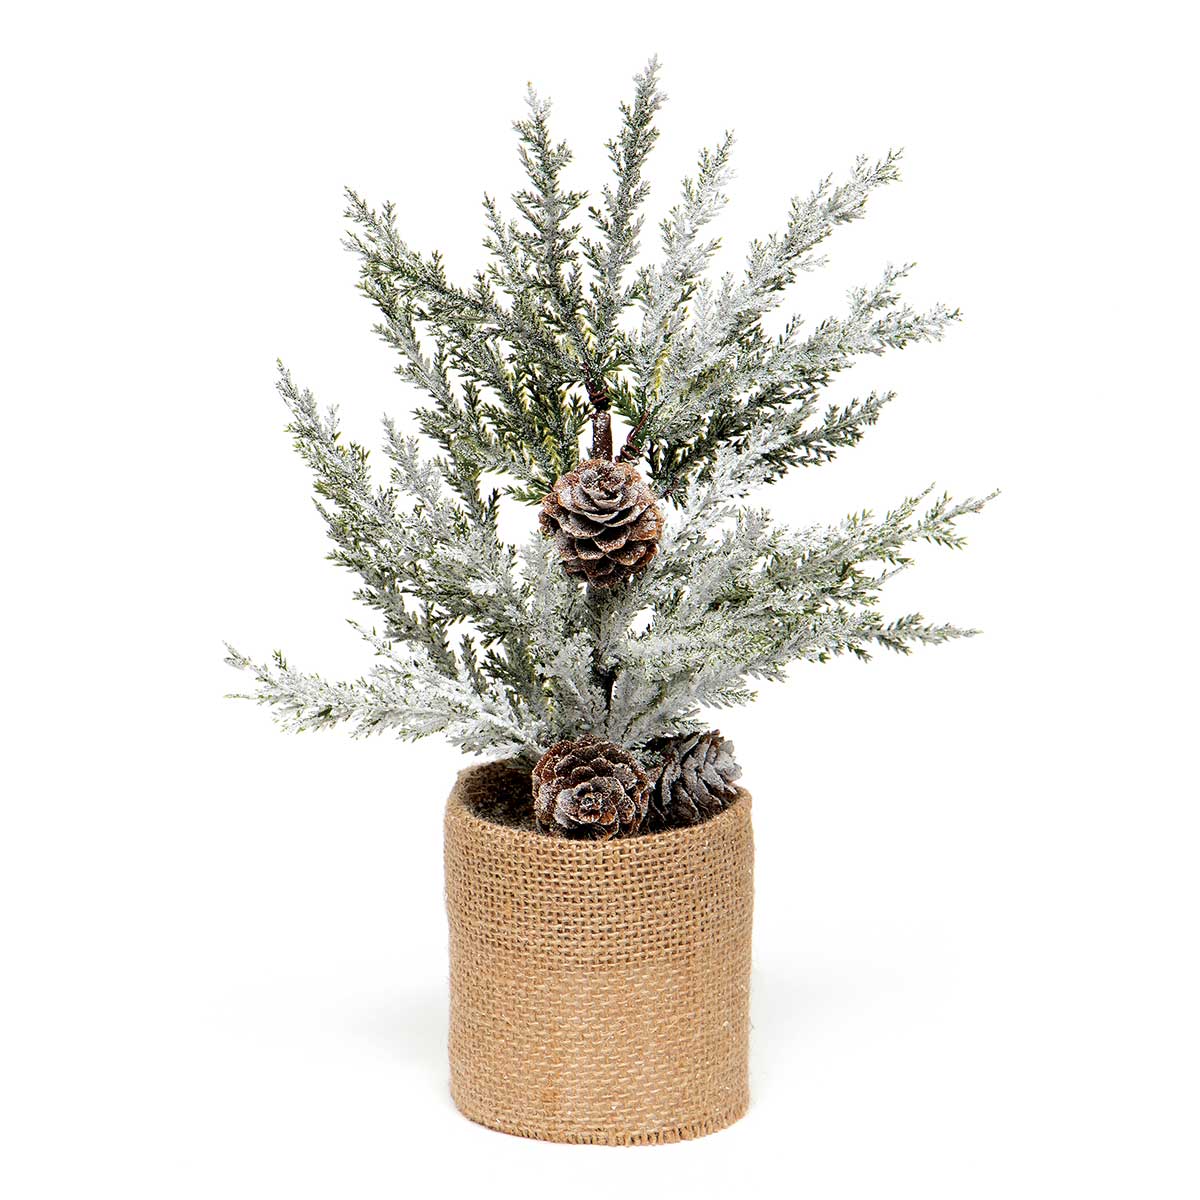 !EVERGREEN PINE TREE IN BURLAP BASE WITH SNOW